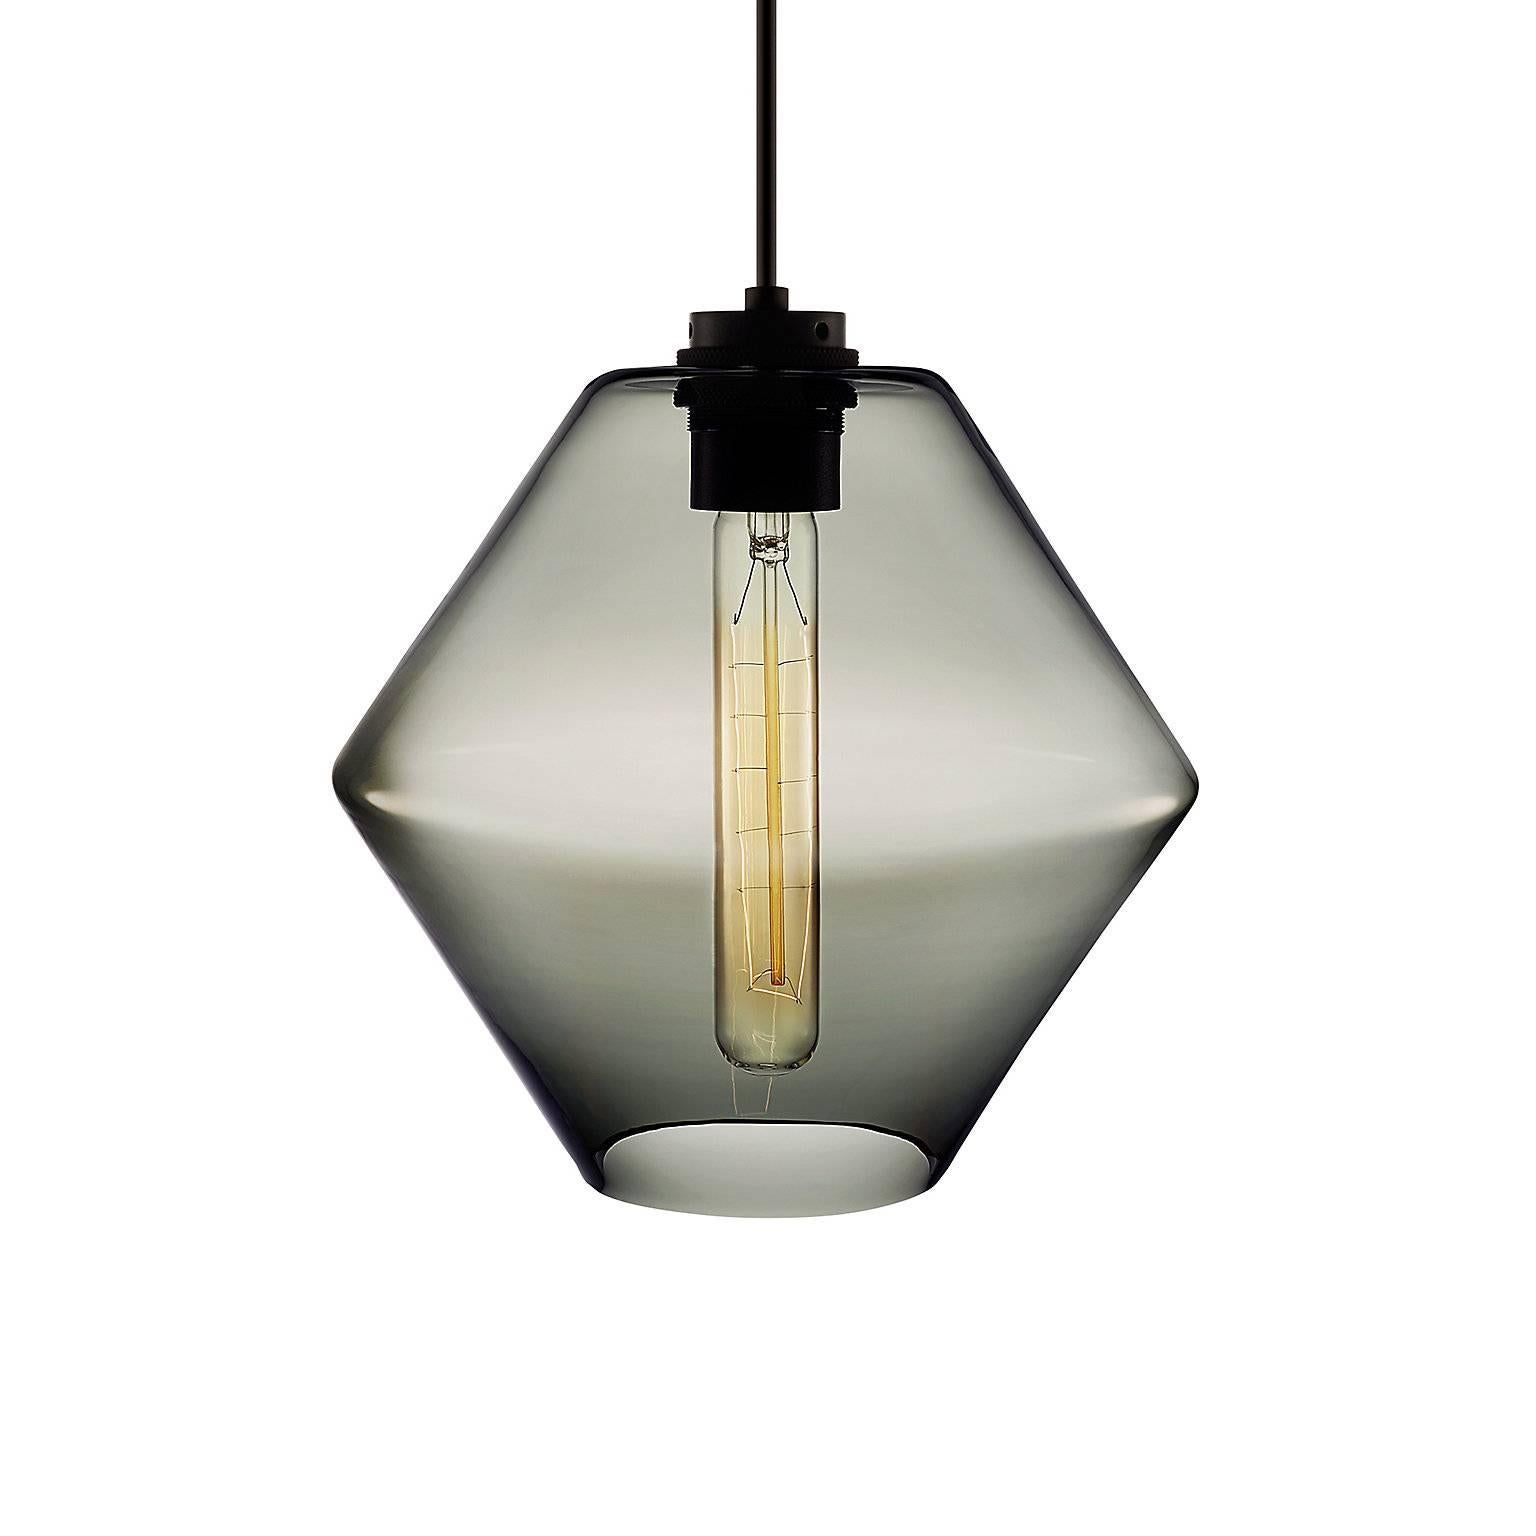 Trove Chartreuse Handblown Modern Glass Pendant Light, Made in the USA In Good Condition For Sale In Beacon, NY